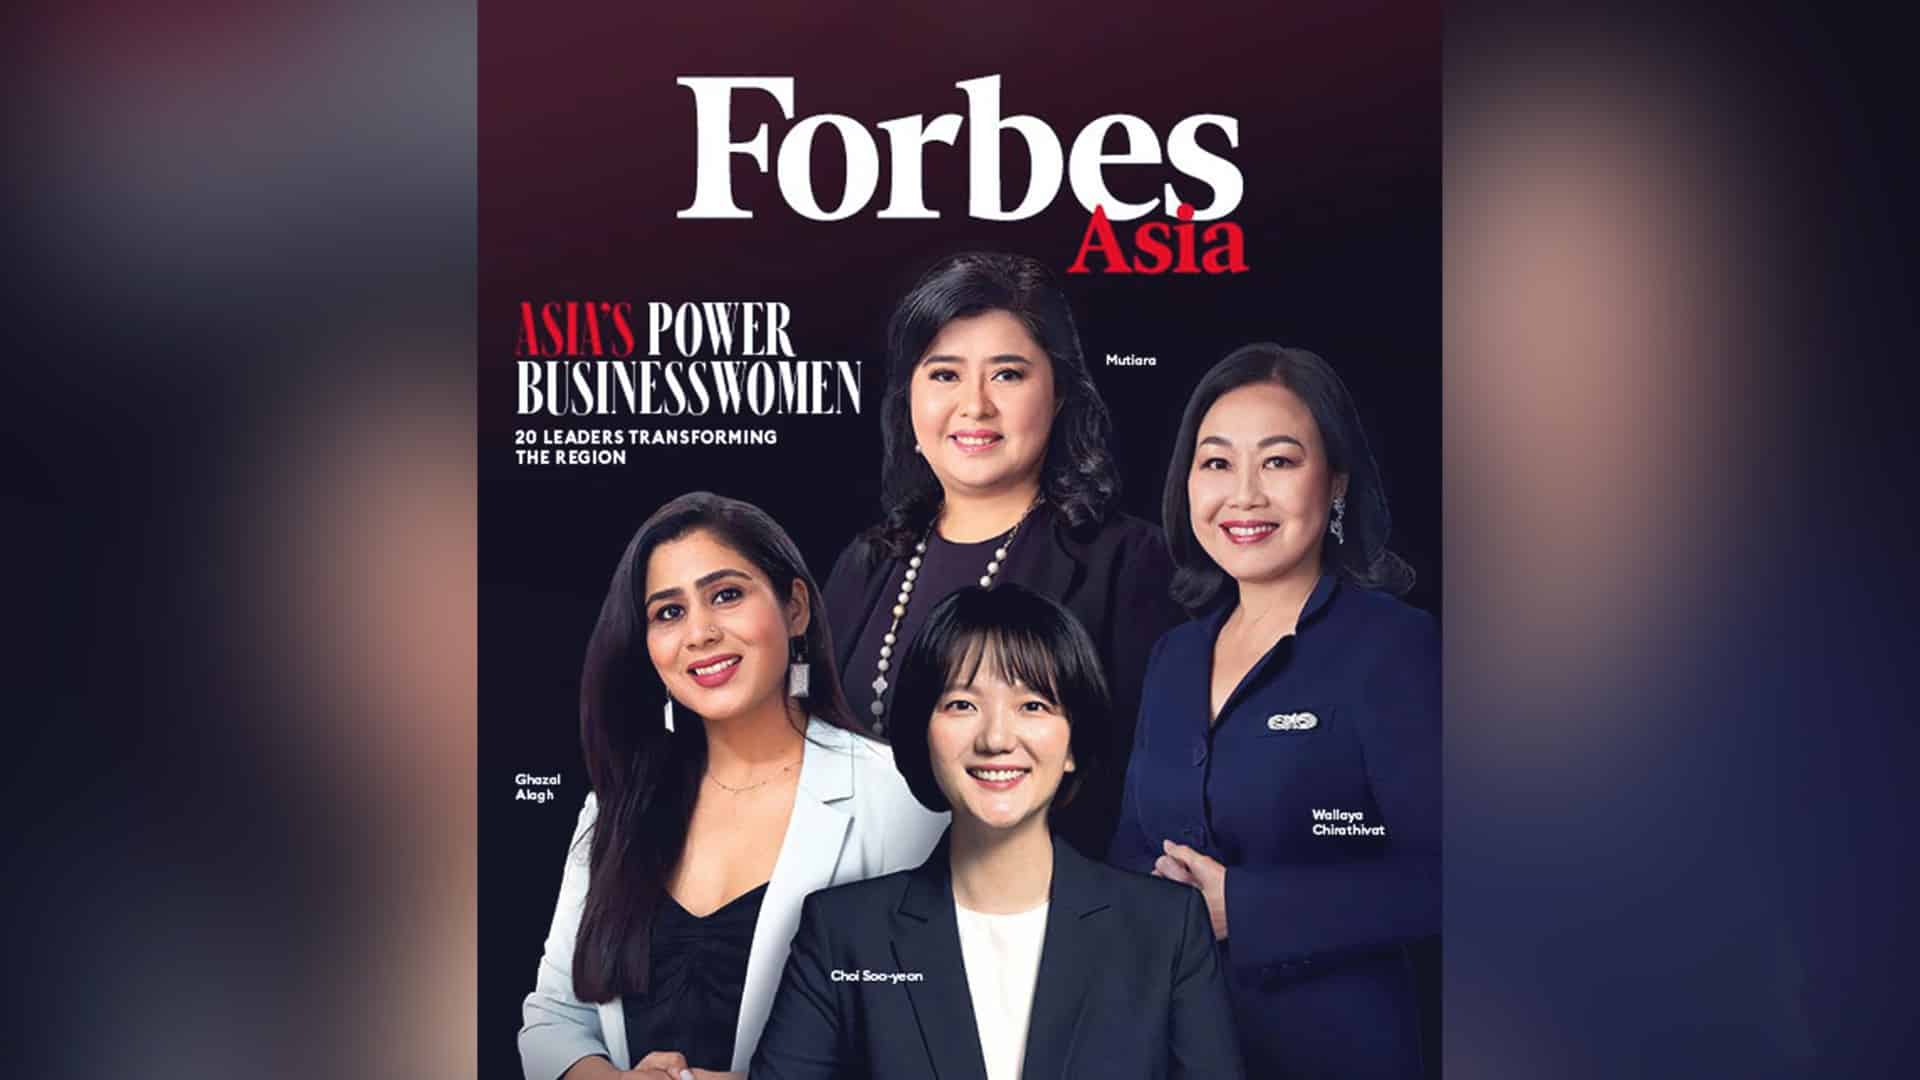 Three prominent Indian businesswomen among 20 Asian lady entrepreneurs in Forbes November issue